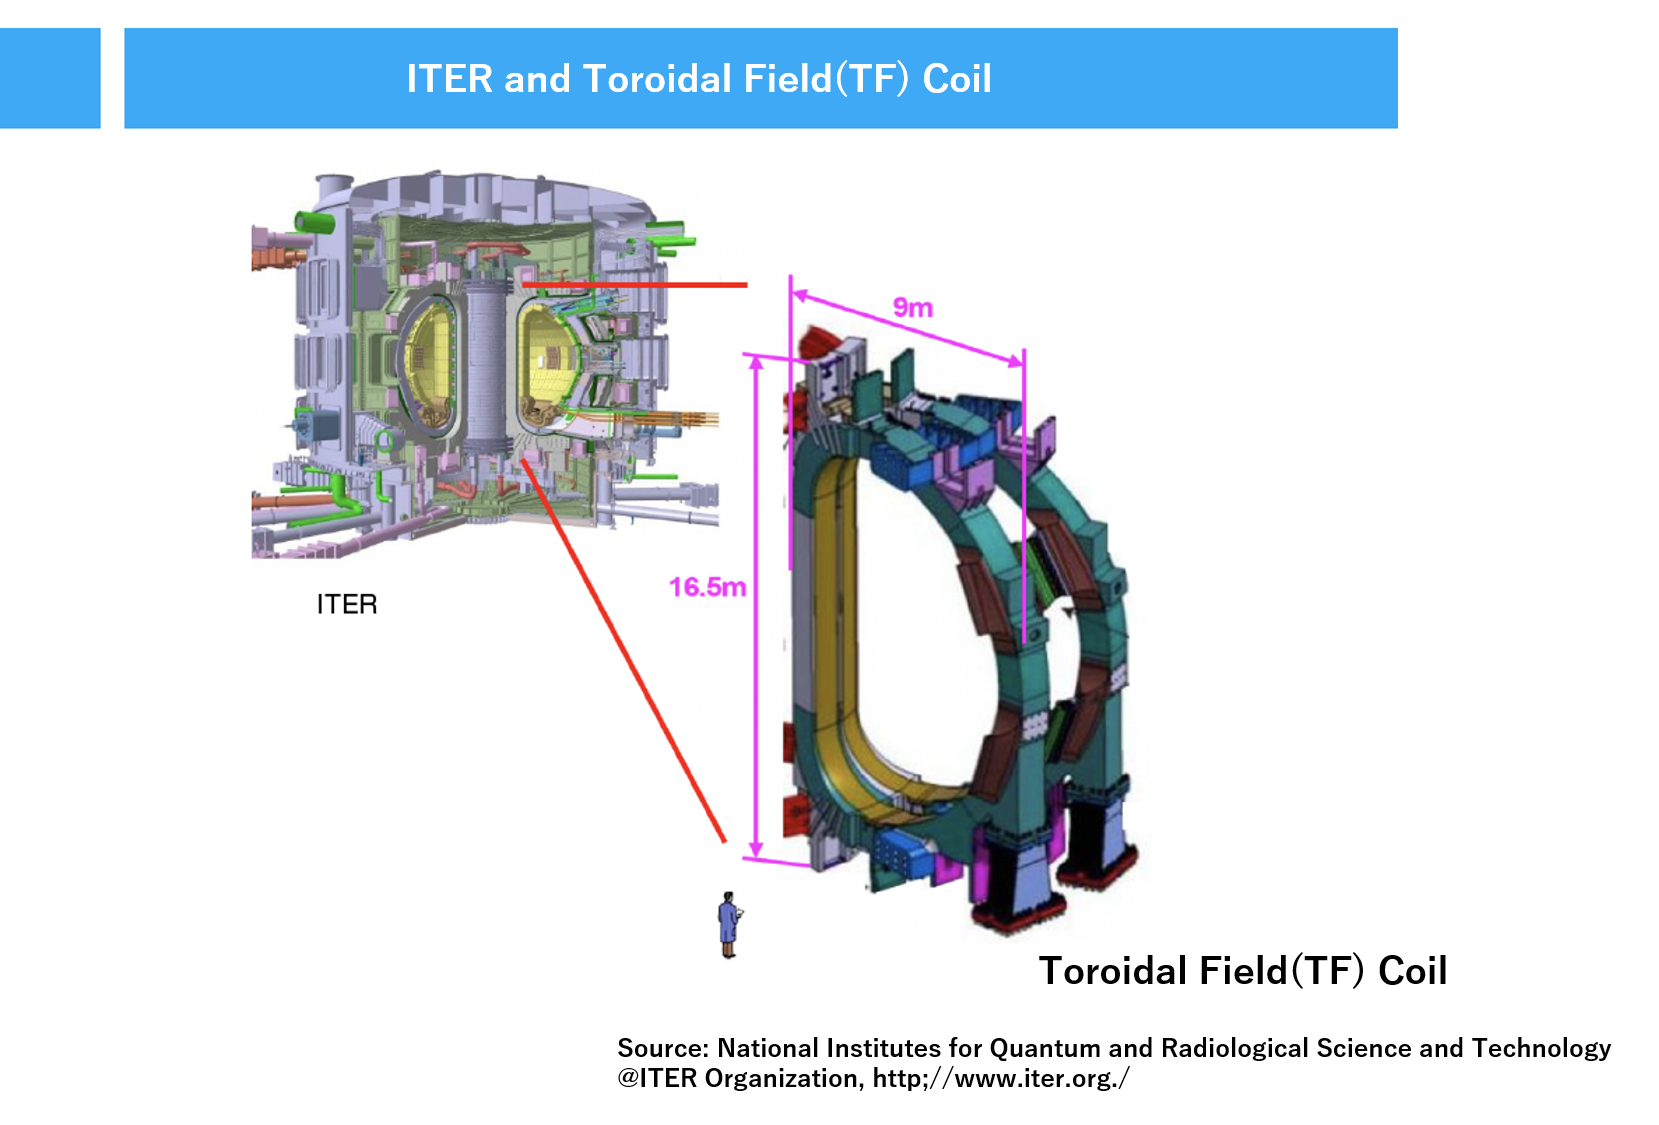 ITER and Toroidal Field(TF) Coil